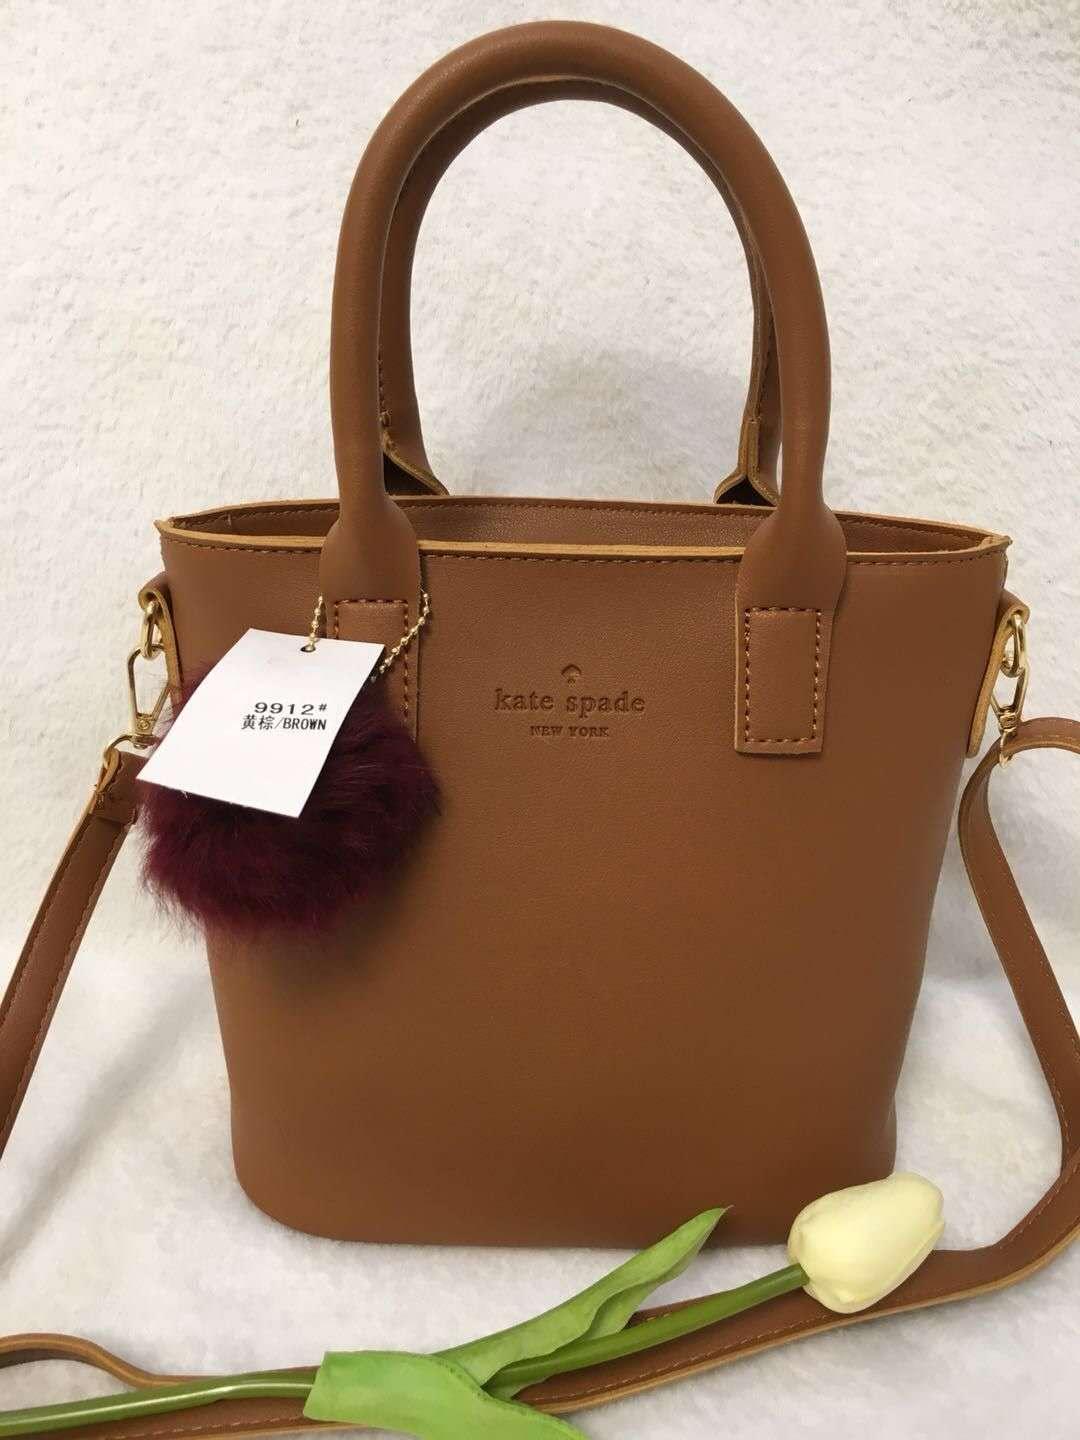 Coach Philippines -Womens Bags for sale - prices & reviews | Lazada